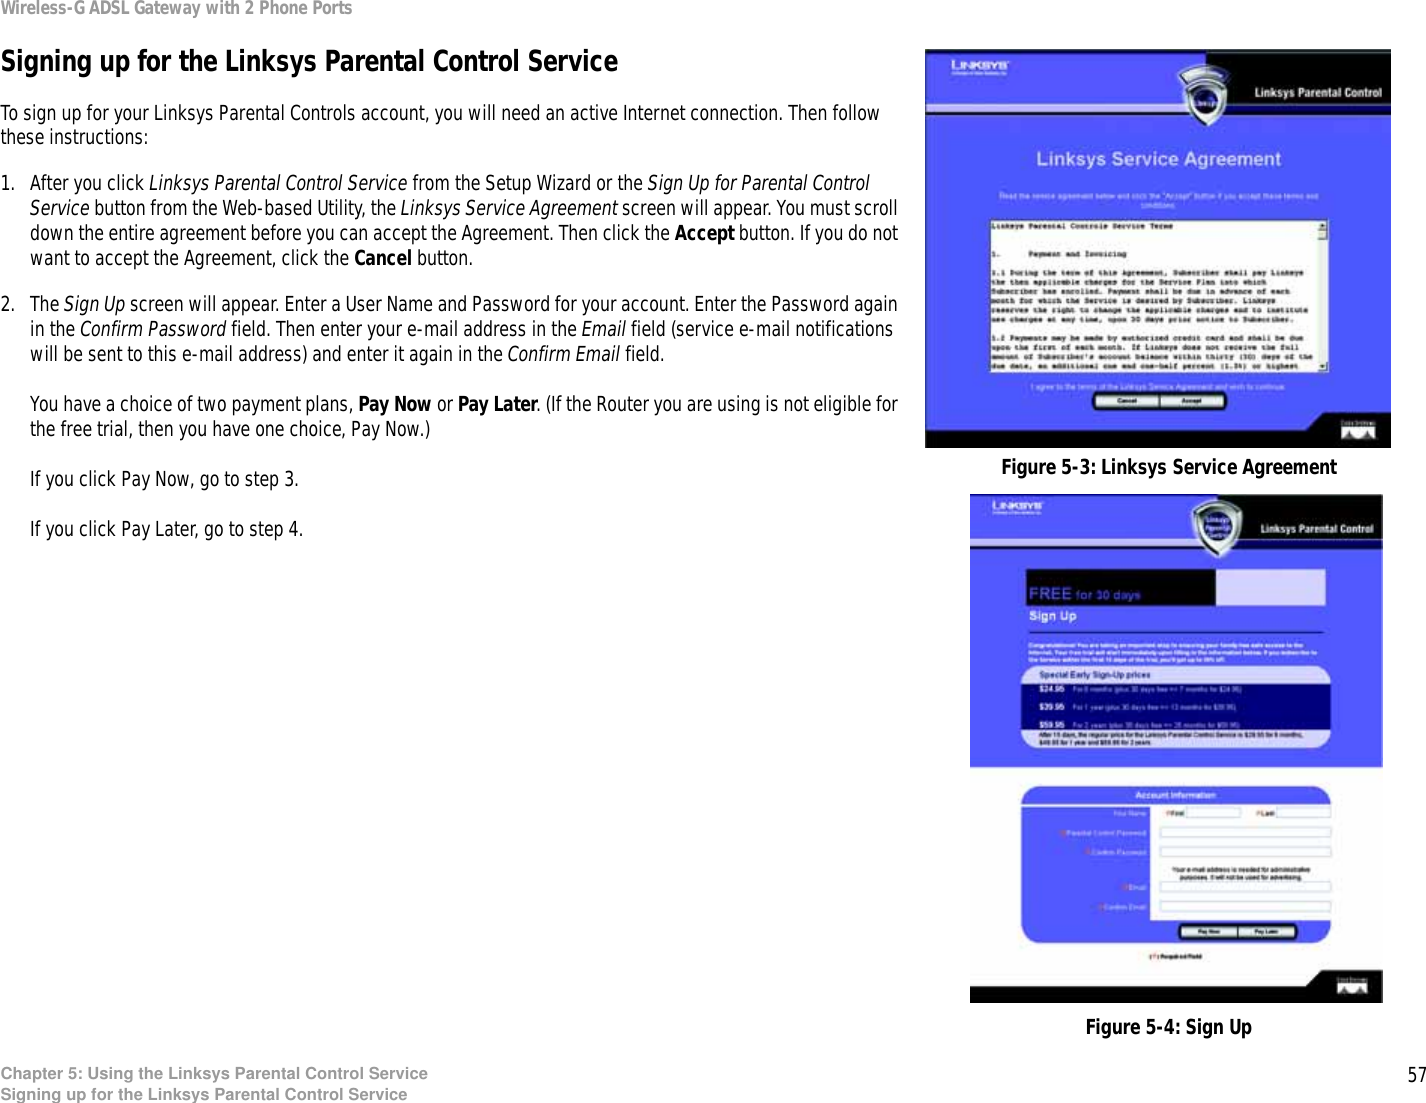 57Chapter 5: Using the Linksys Parental Control ServiceSigning up for the Linksys Parental Control ServiceWireless-G ADSL Gateway with 2 Phone PortsSigning up for the Linksys Parental Control ServiceTo sign up for your Linksys Parental Controls account, you will need an active Internet connection. Then follow these instructions:1. After you click Linksys Parental Control Service from the Setup Wizard or the Sign Up for Parental Control Service button from the Web-based Utility, the Linksys Service Agreement screen will appear. You must scroll down the entire agreement before you can accept the Agreement. Then click the Accept button. If you do not want to accept the Agreement, click the Cancel button.2. The Sign Up screen will appear. Enter a User Name and Password for your account. Enter the Password again in the Confirm Password field. Then enter your e-mail address in the Email field (service e-mail notifications will be sent to this e-mail address) and enter it again in the Confirm Email field.You have a choice of two payment plans, Pay Now or Pay Later. (If the Router you are using is not eligible for the free trial, then you have one choice, Pay Now.)If you click Pay Now, go to step 3.If you click Pay Later, go to step 4.Figure 5-4: Sign UpFigure 5-3: Linksys Service Agreement